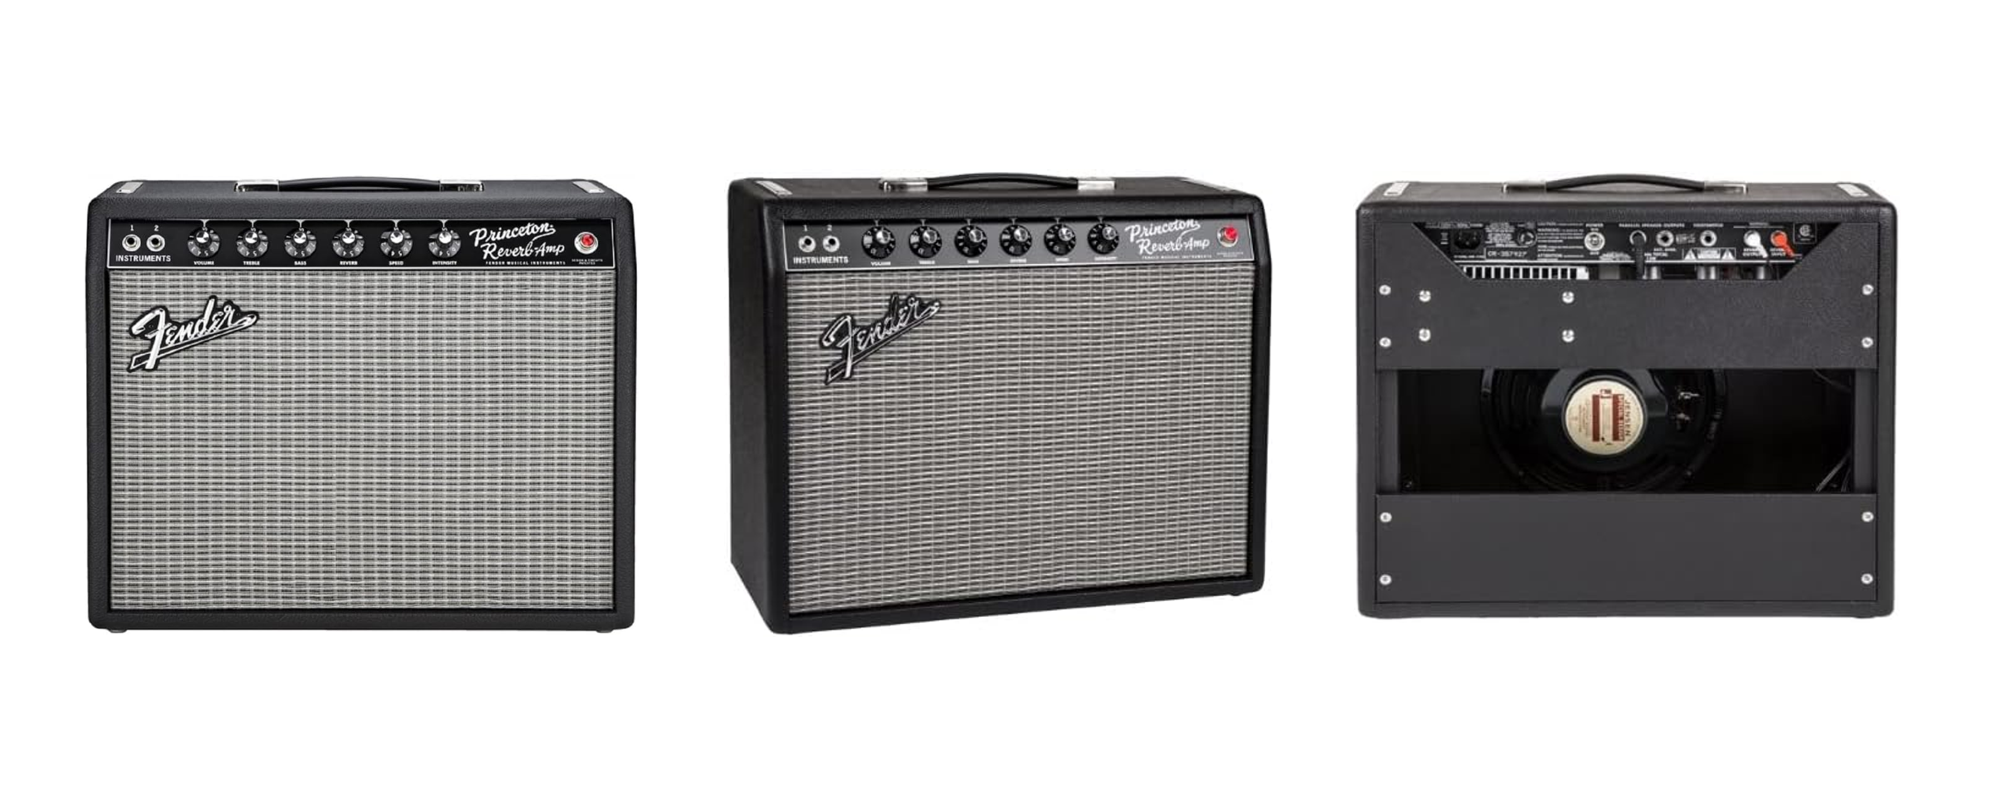 Fender ’65 Princeton Reverb Review: The Ideal Fender Combo Amp?